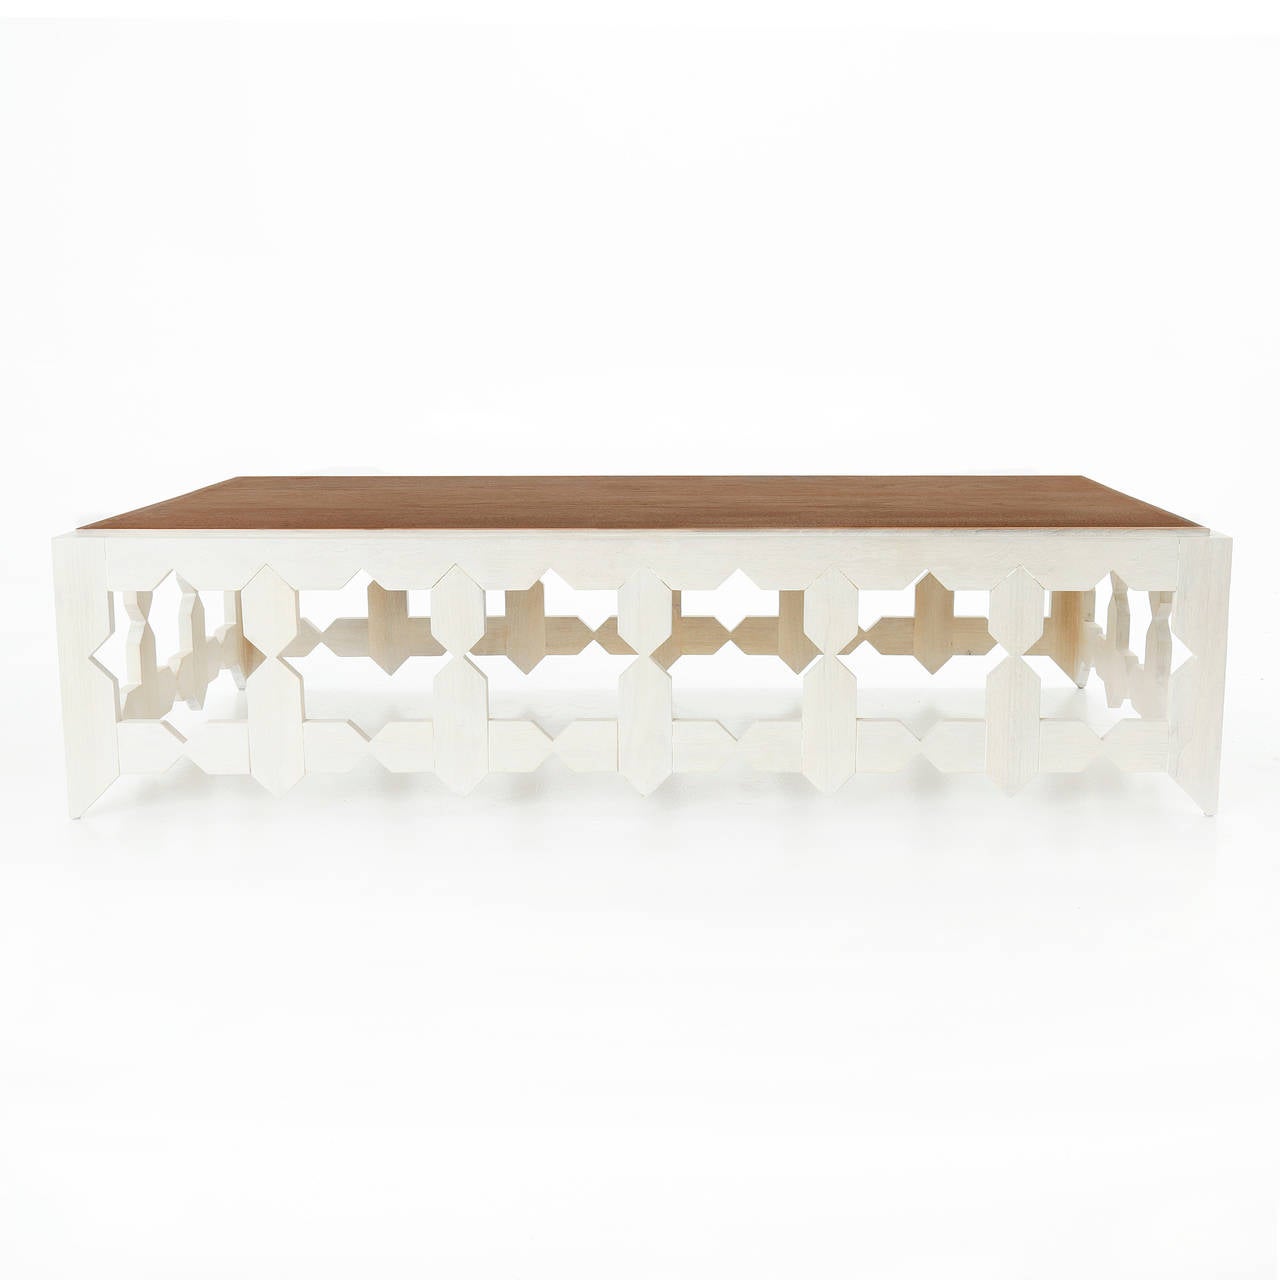 A rectangular coffee table in Walnut with natural top and bleached sides with star cut-out designs. 

Many pieces are stored in our warehouse, so please click on CONTACT DEALER under our logo below to find out if the pieces you are interested in